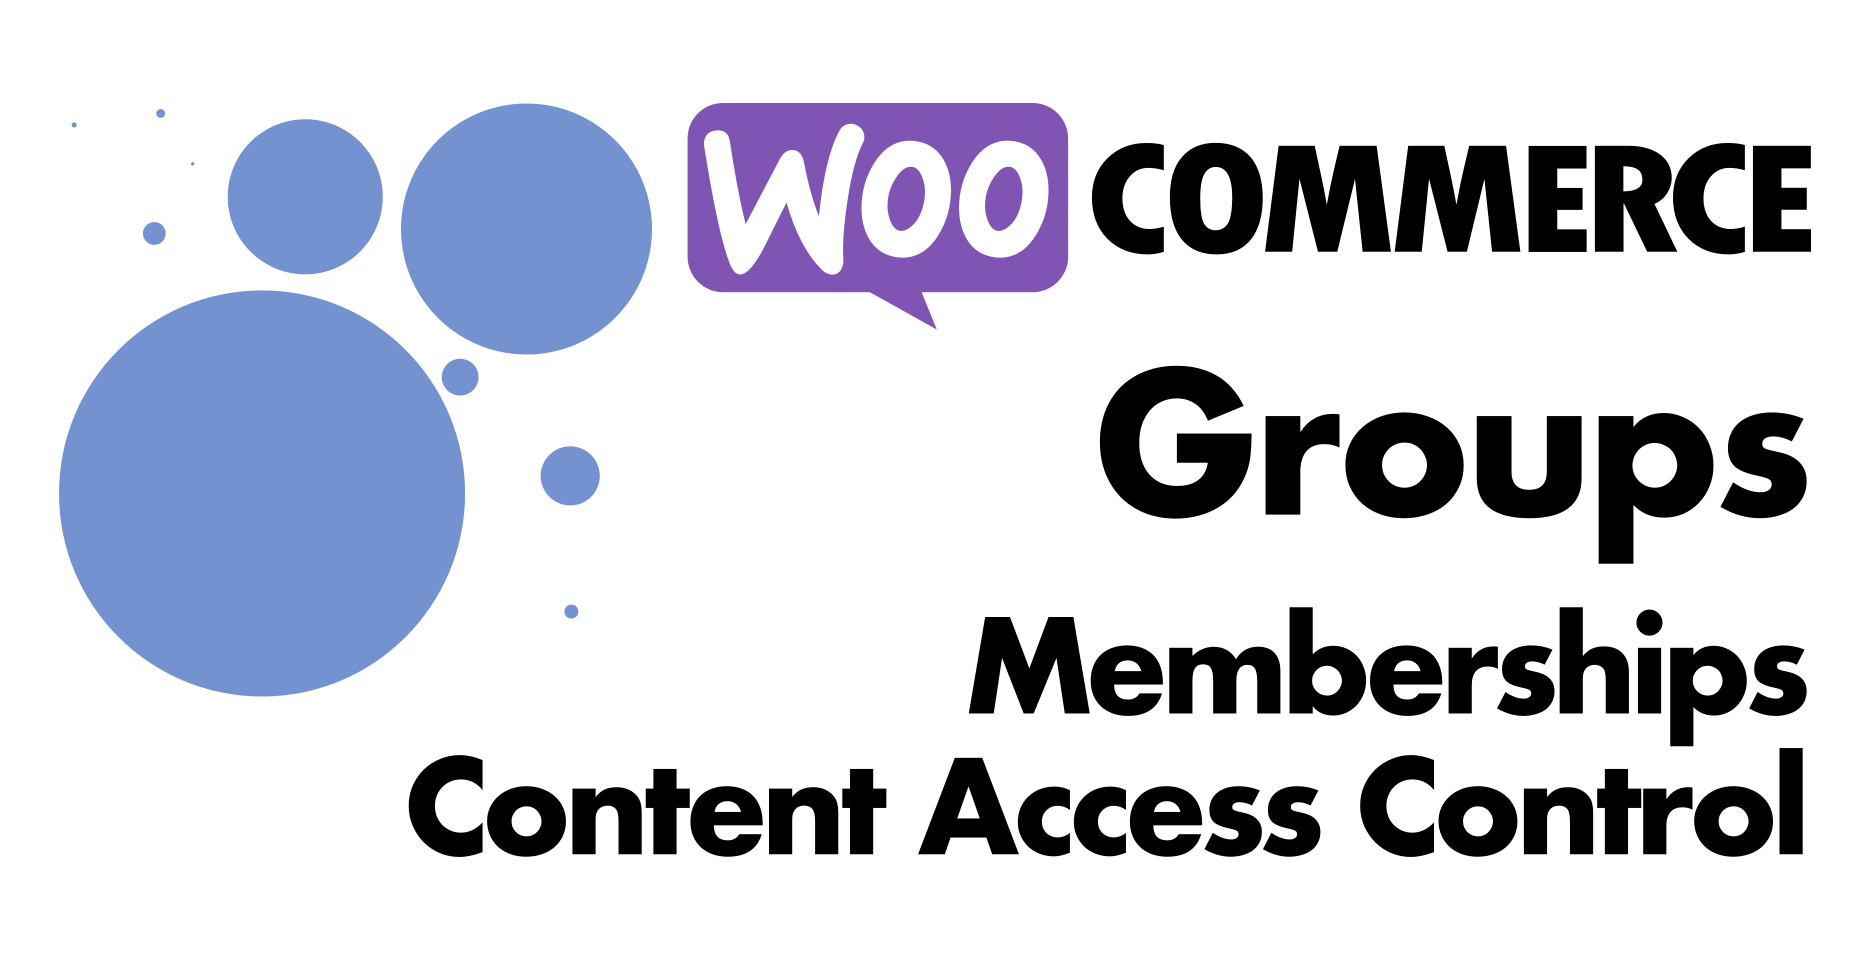 Groups for WooCommerce
						
						
							1.32.0